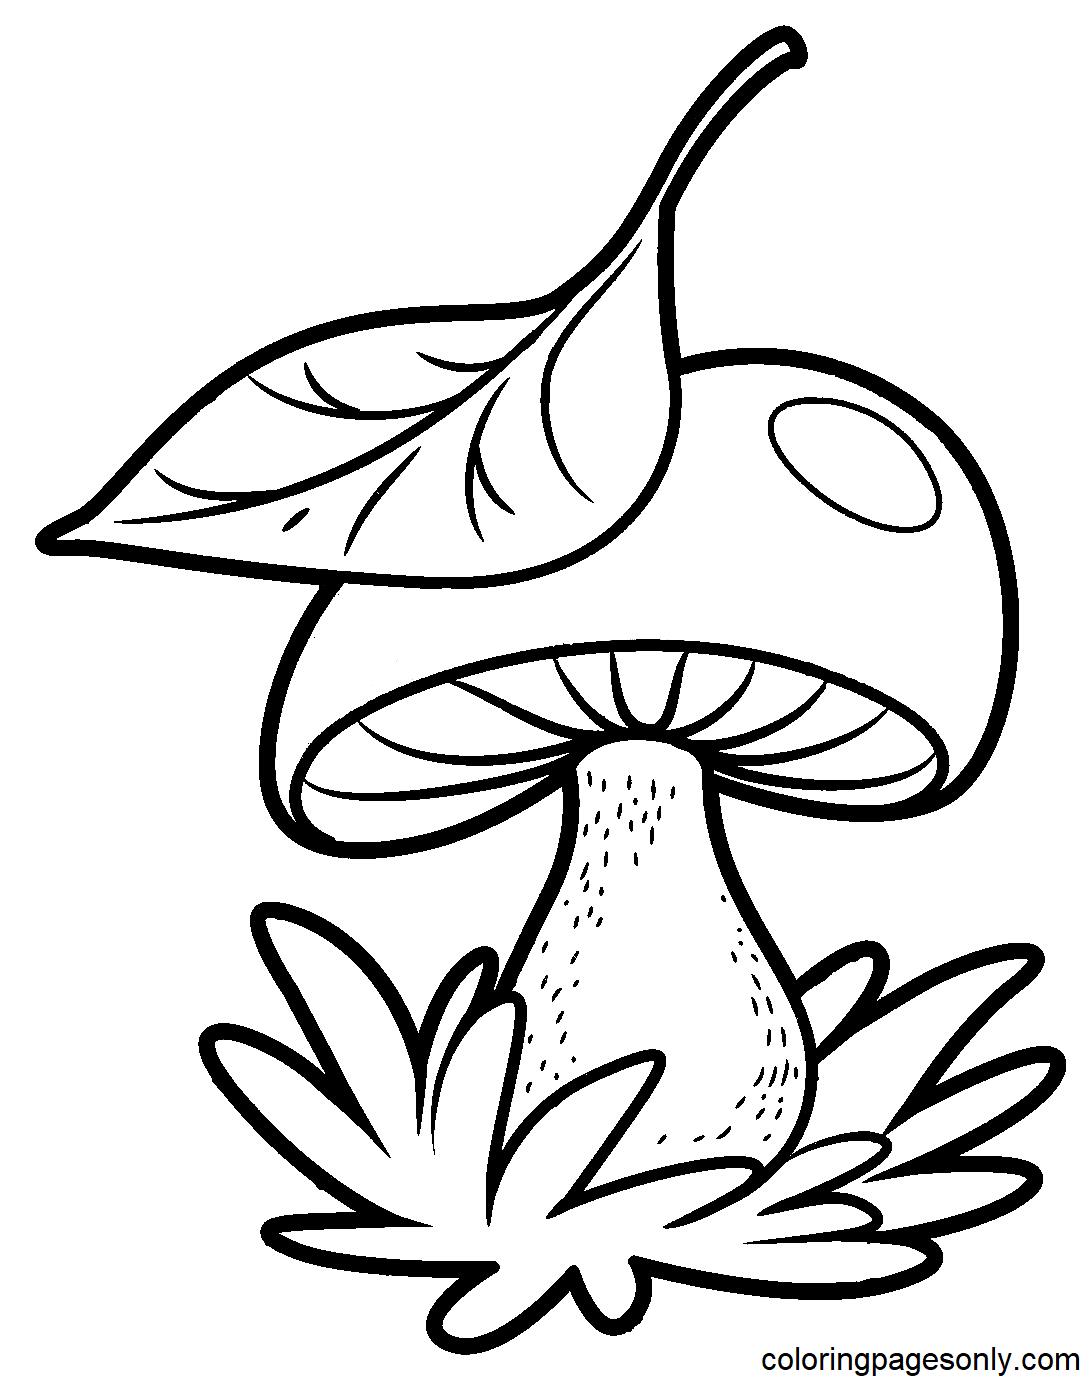 Mushroom with Leaf Coloring Page